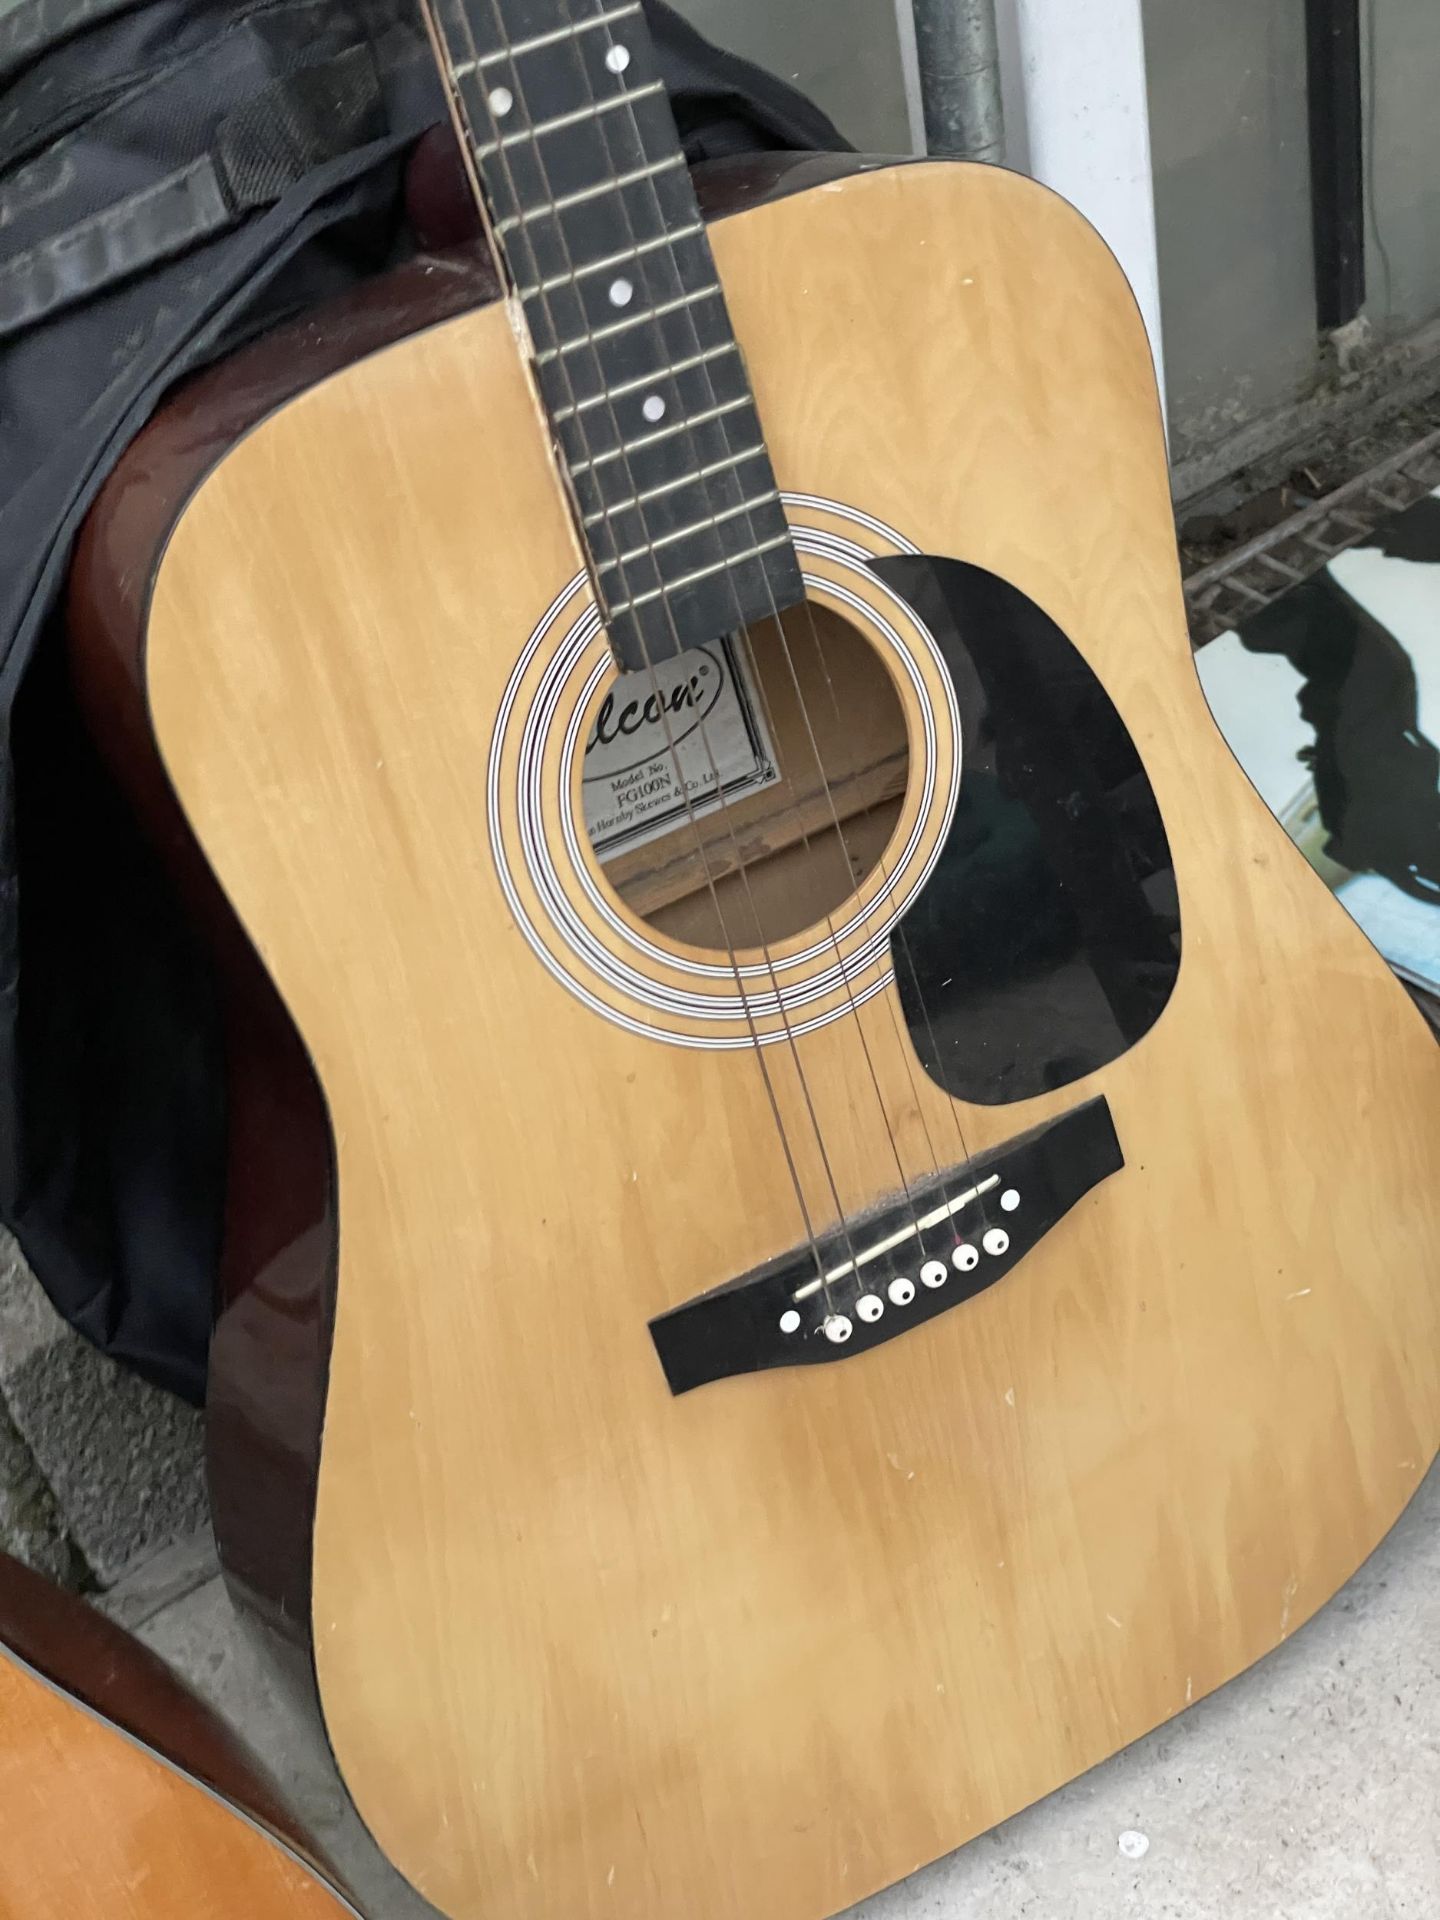 A FALCON ACOUSTIC GUITAR - Image 3 of 4